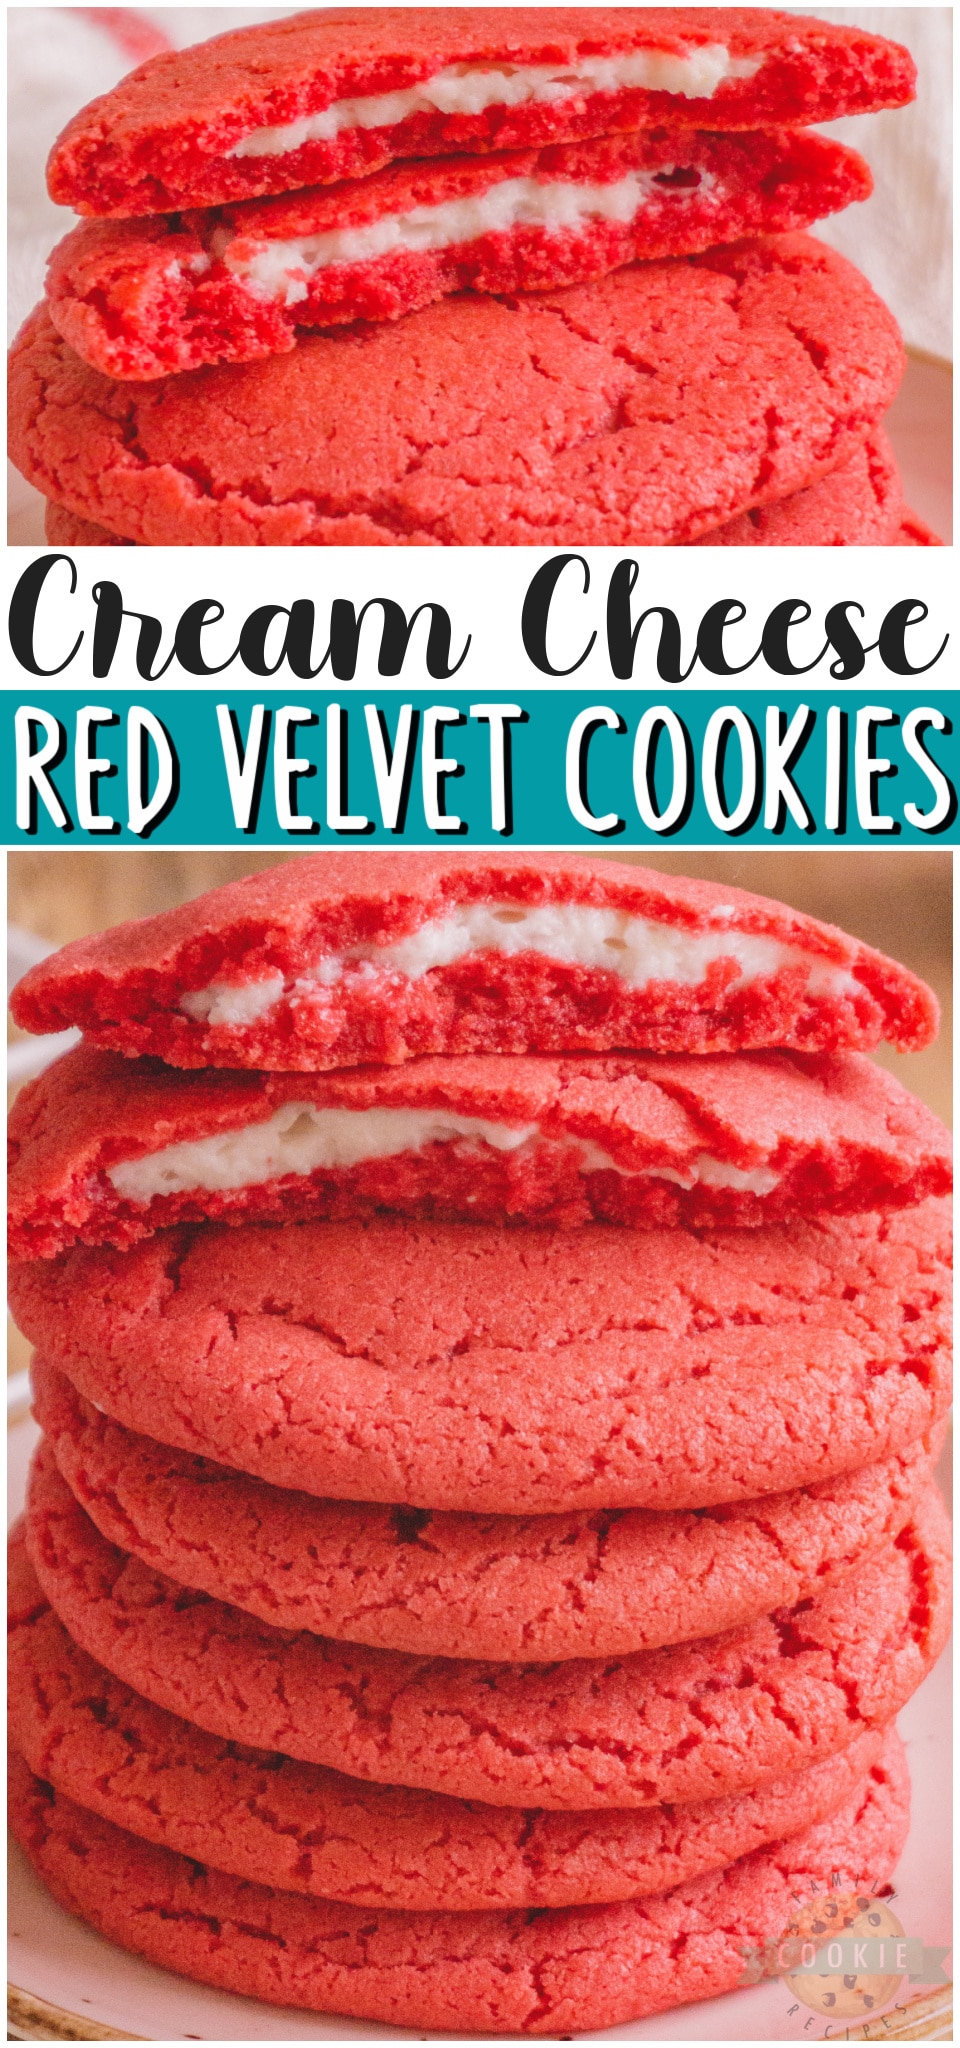 Cream Cheese red velvet cookies are soft & rich, vibrant red cookies with a fun surprise in the middle! Perfect Inside Out Red Velvet Cookies for Valentine's Day or just because! #redvelvet #cookies #creamcheese #insideout #baking #dessert #Valentines #easyrecipe from FAMILY COOKIE RECIPES via @buttergirls